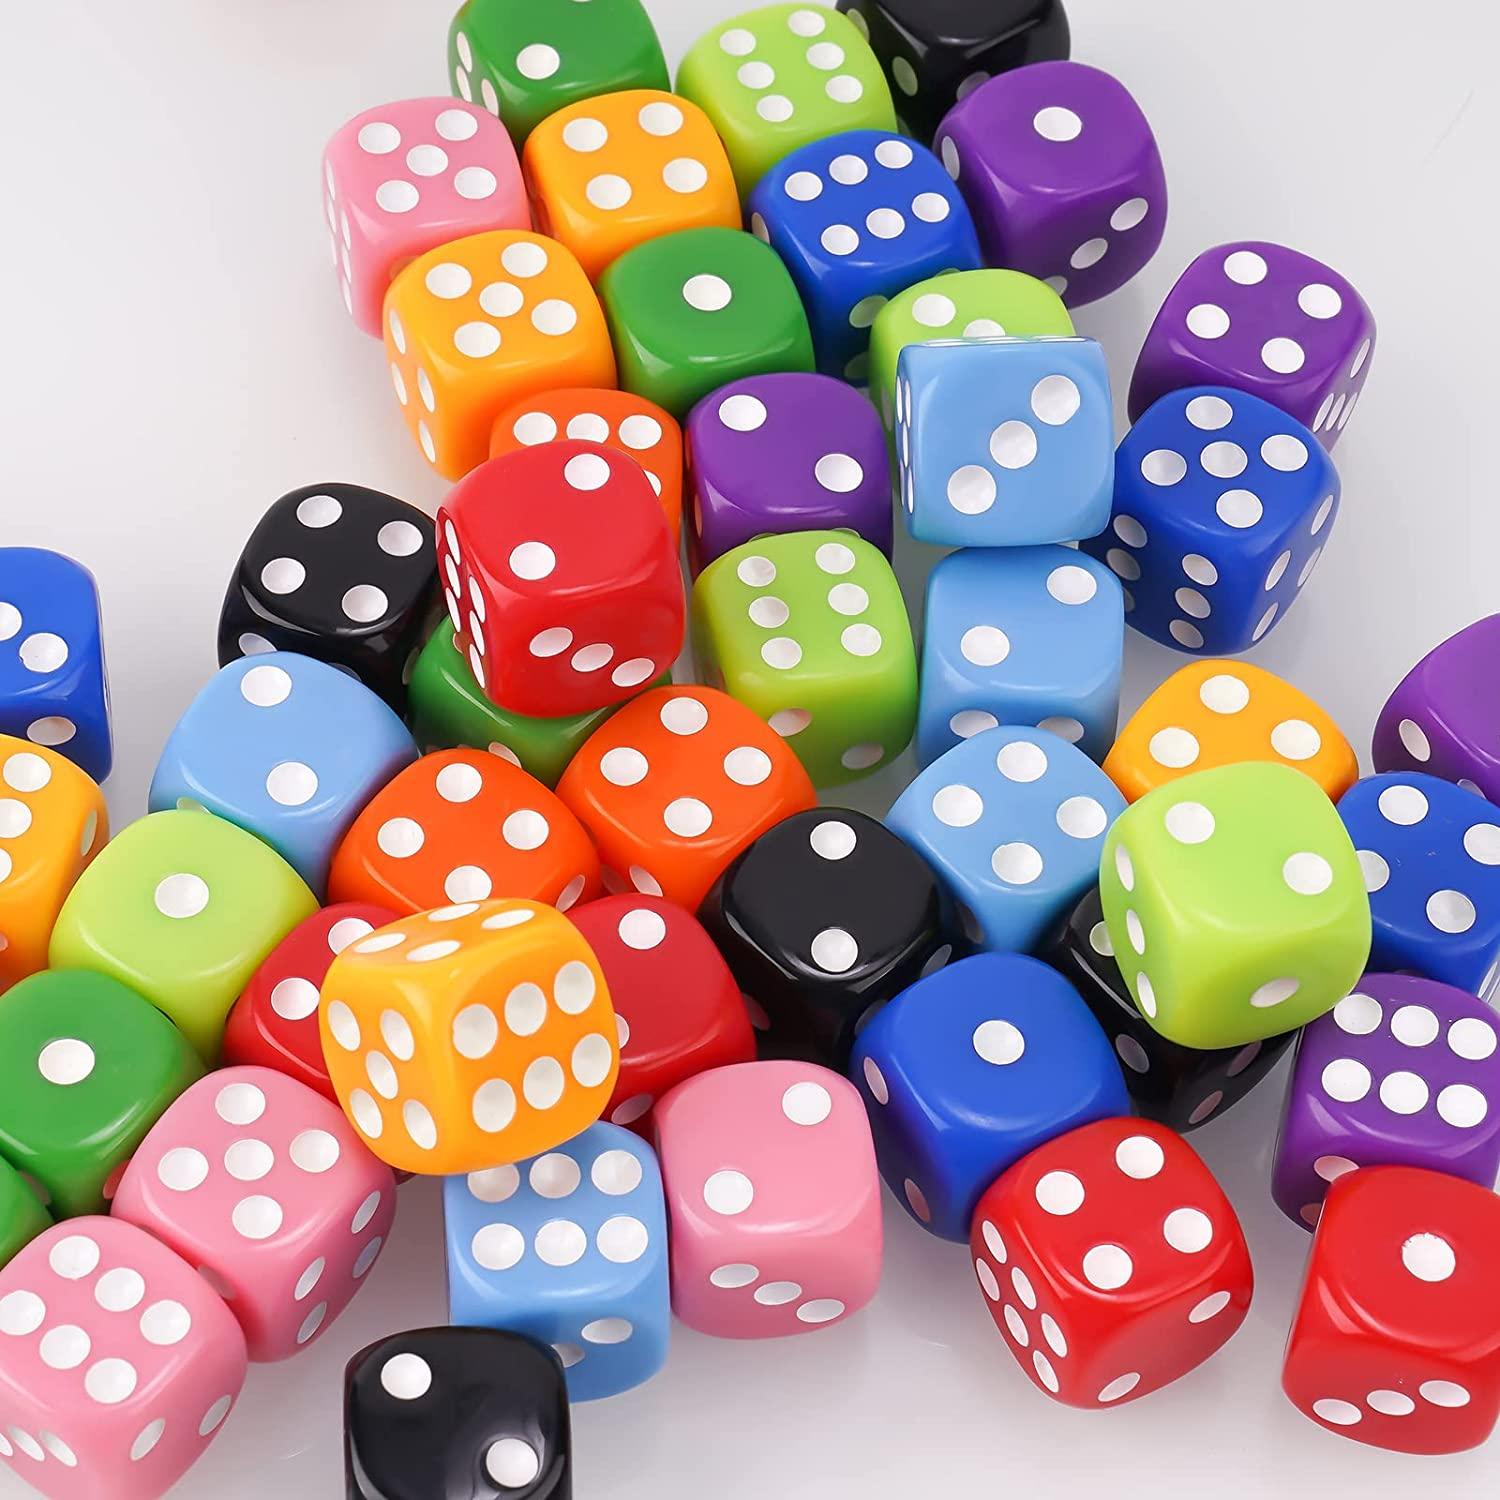 2 Pcs Dice 16mm Colorful Teaching Dice 6 Sided Smooth Edge Non-fading Board  Games Wide Application E